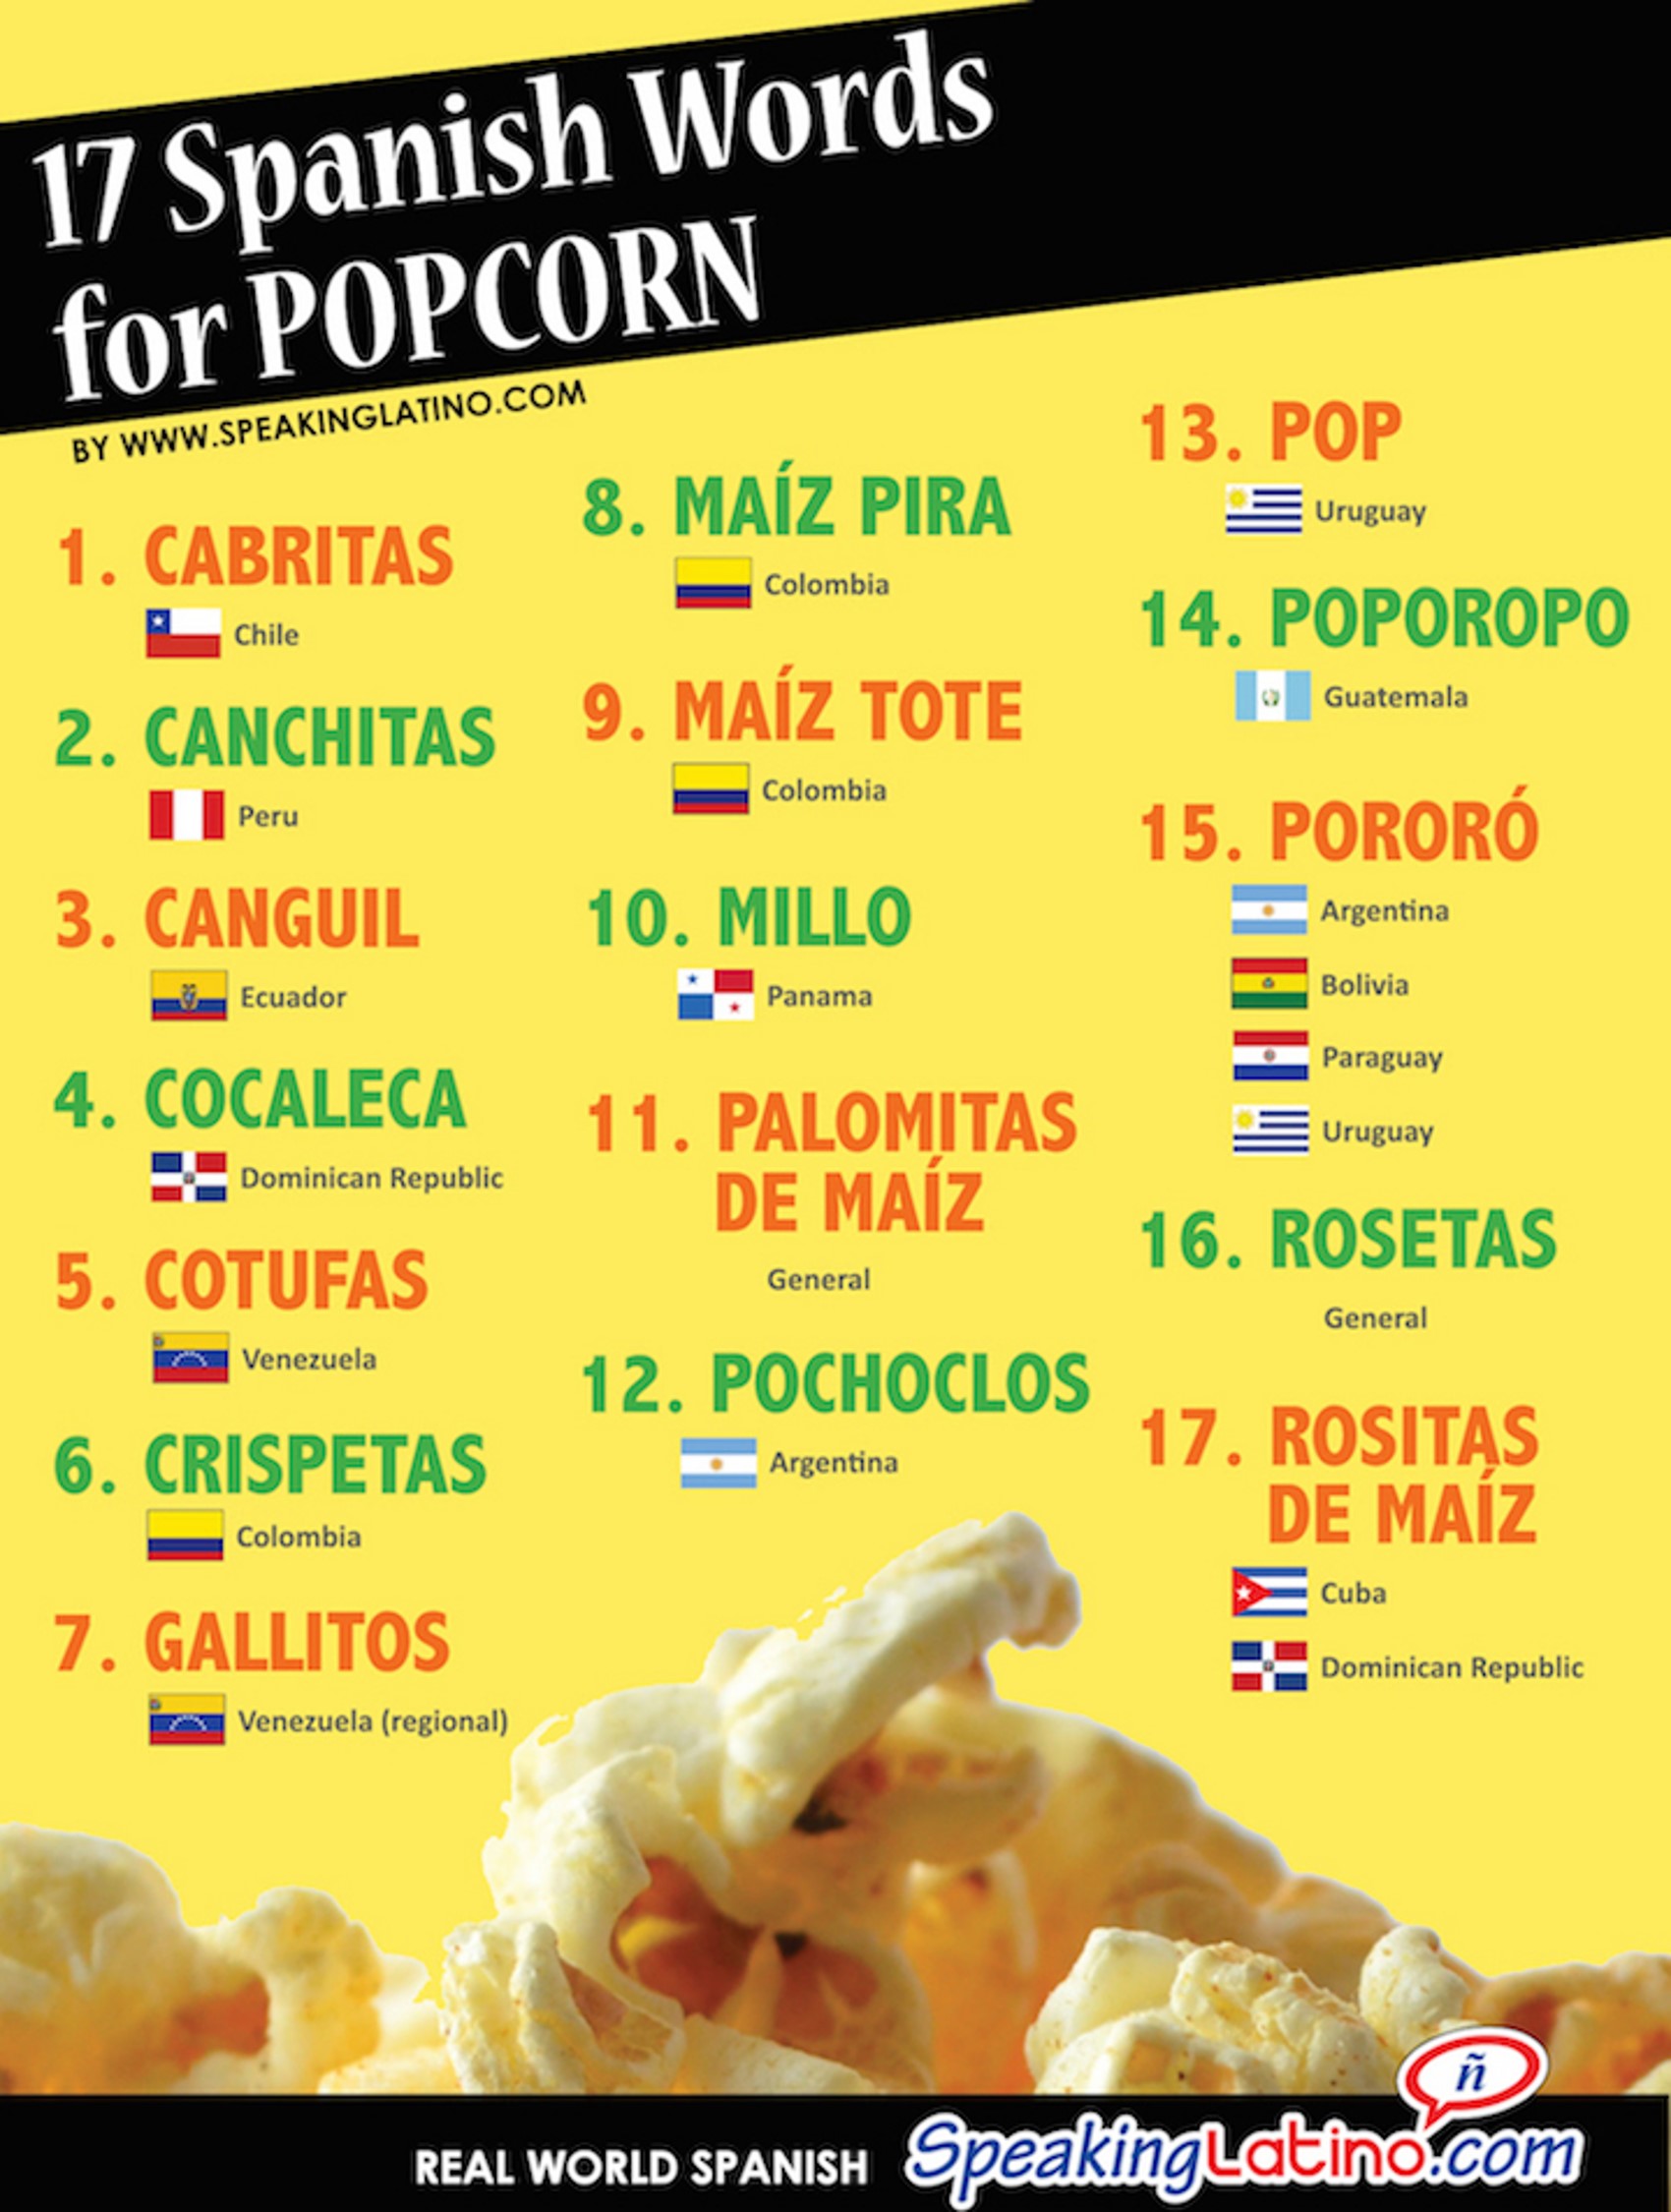 Spanish words for popcorn localization example